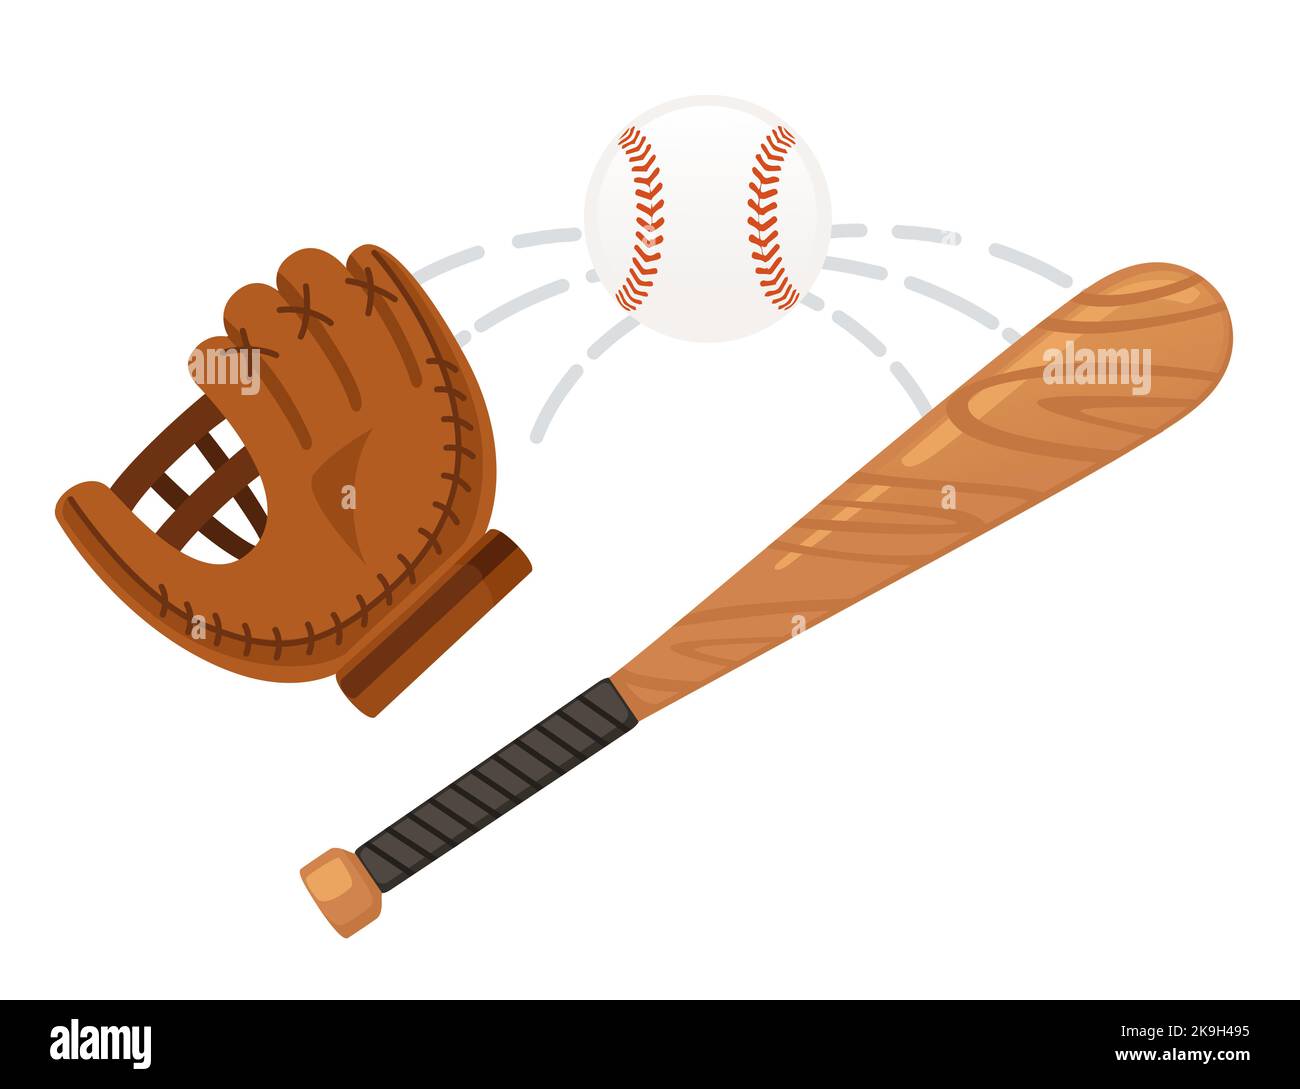 Wooden baseball bat with leather protective glove vector illustration isolated on white background Stock Vector